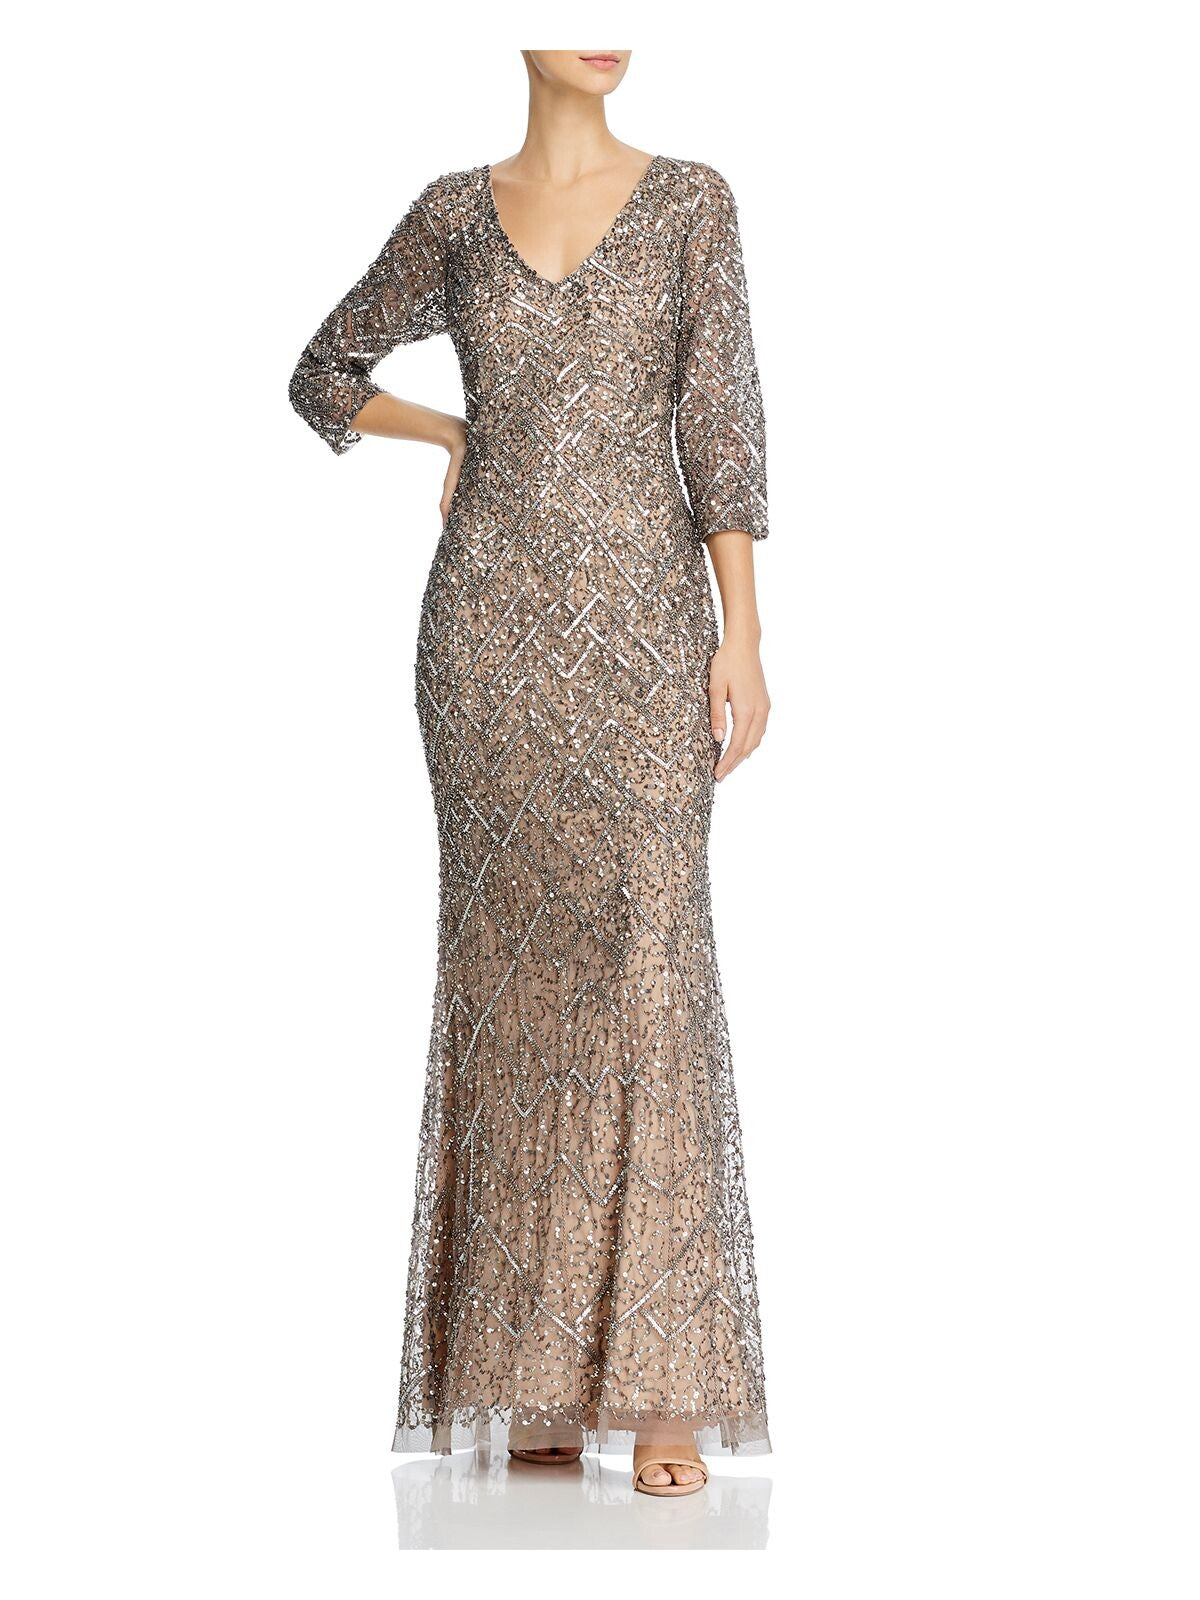 ADRIANNA PAPELL Womens Silver Embellished Zippered Mesh Gown 3/4 Sleeve V Neck Full-Length Formal Dress 6